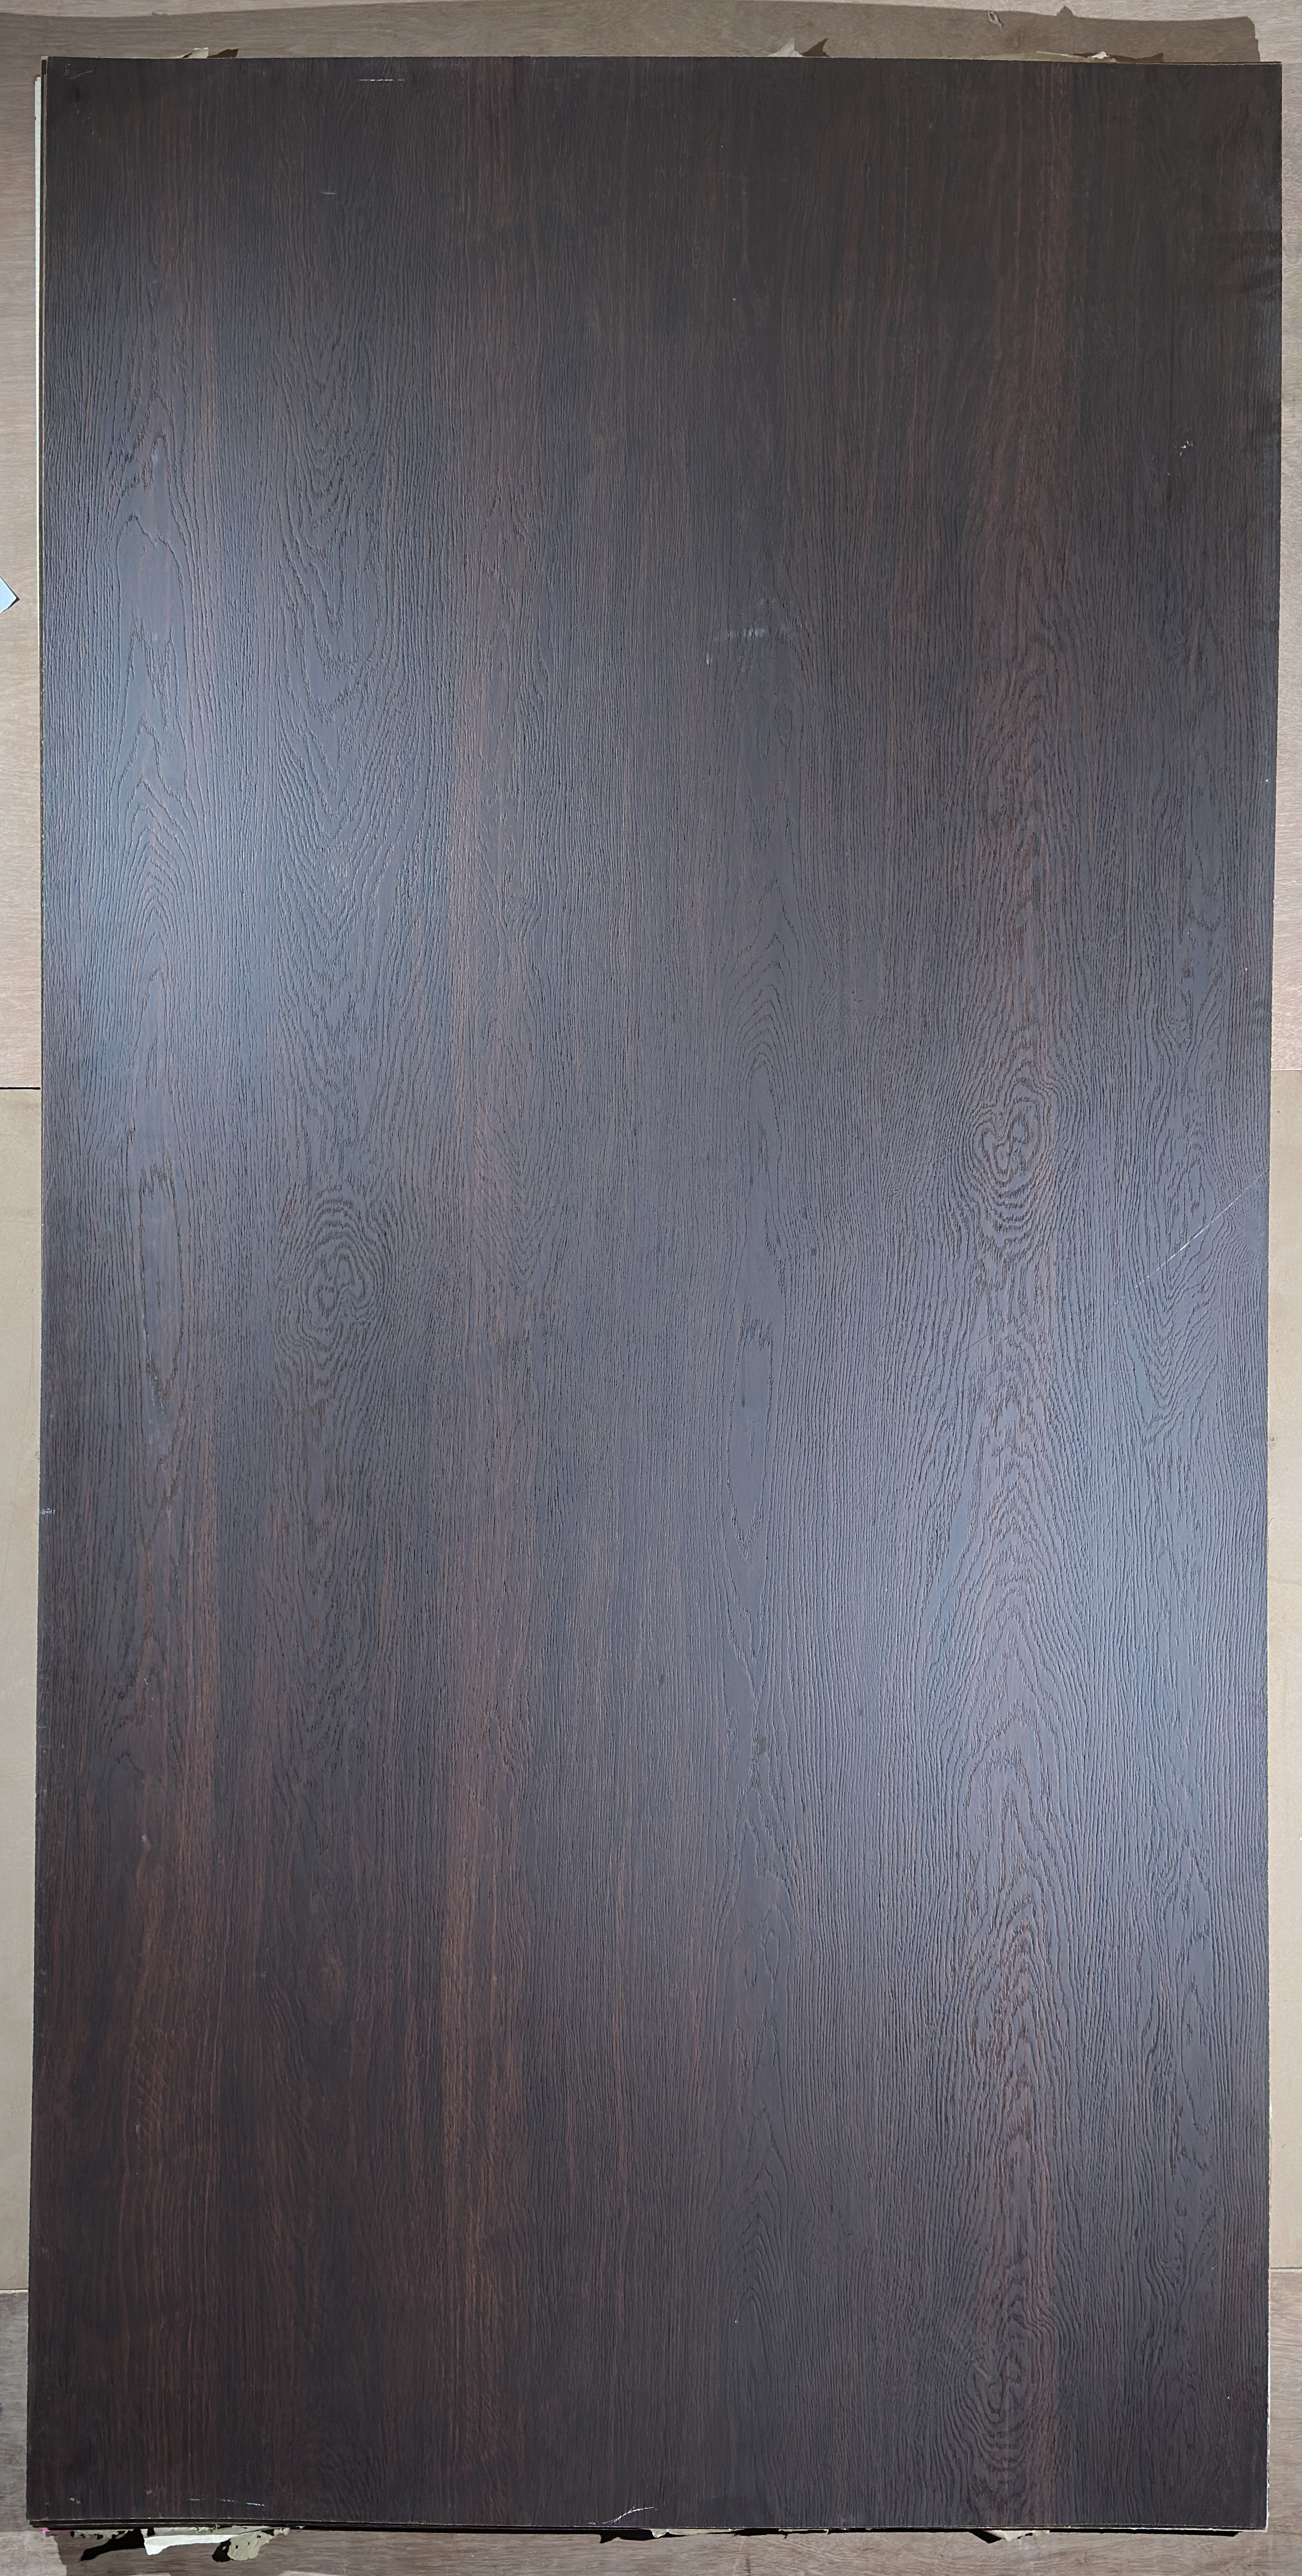 A close-up of a Brown 88079 WV with a Texture finish Decorative Laminate available at Material Depot in Bangalore